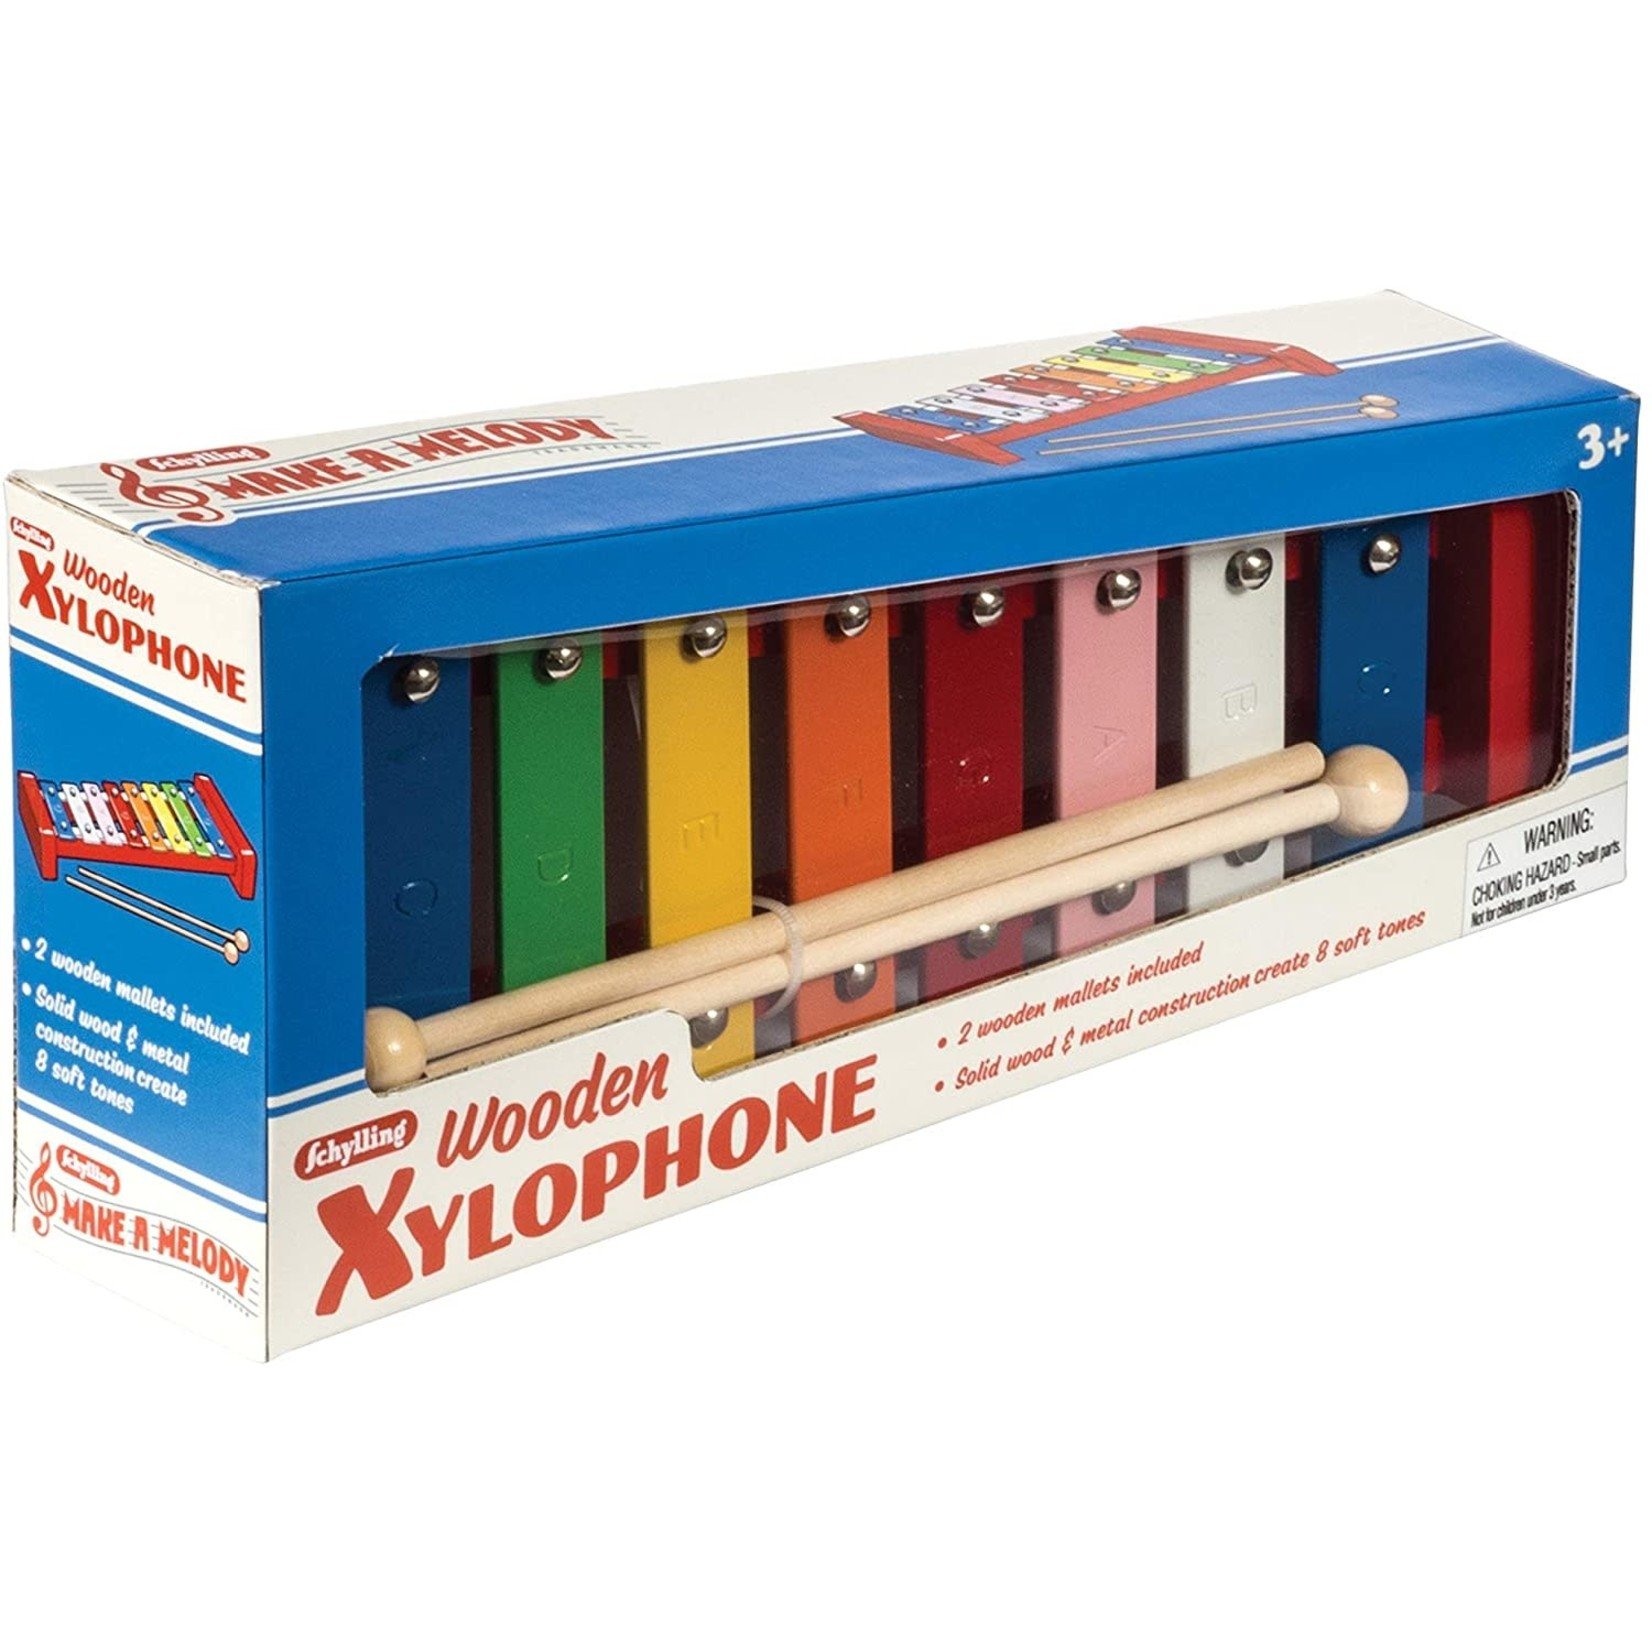 Xylophone - Wooden - Maxima Gift and Book Center